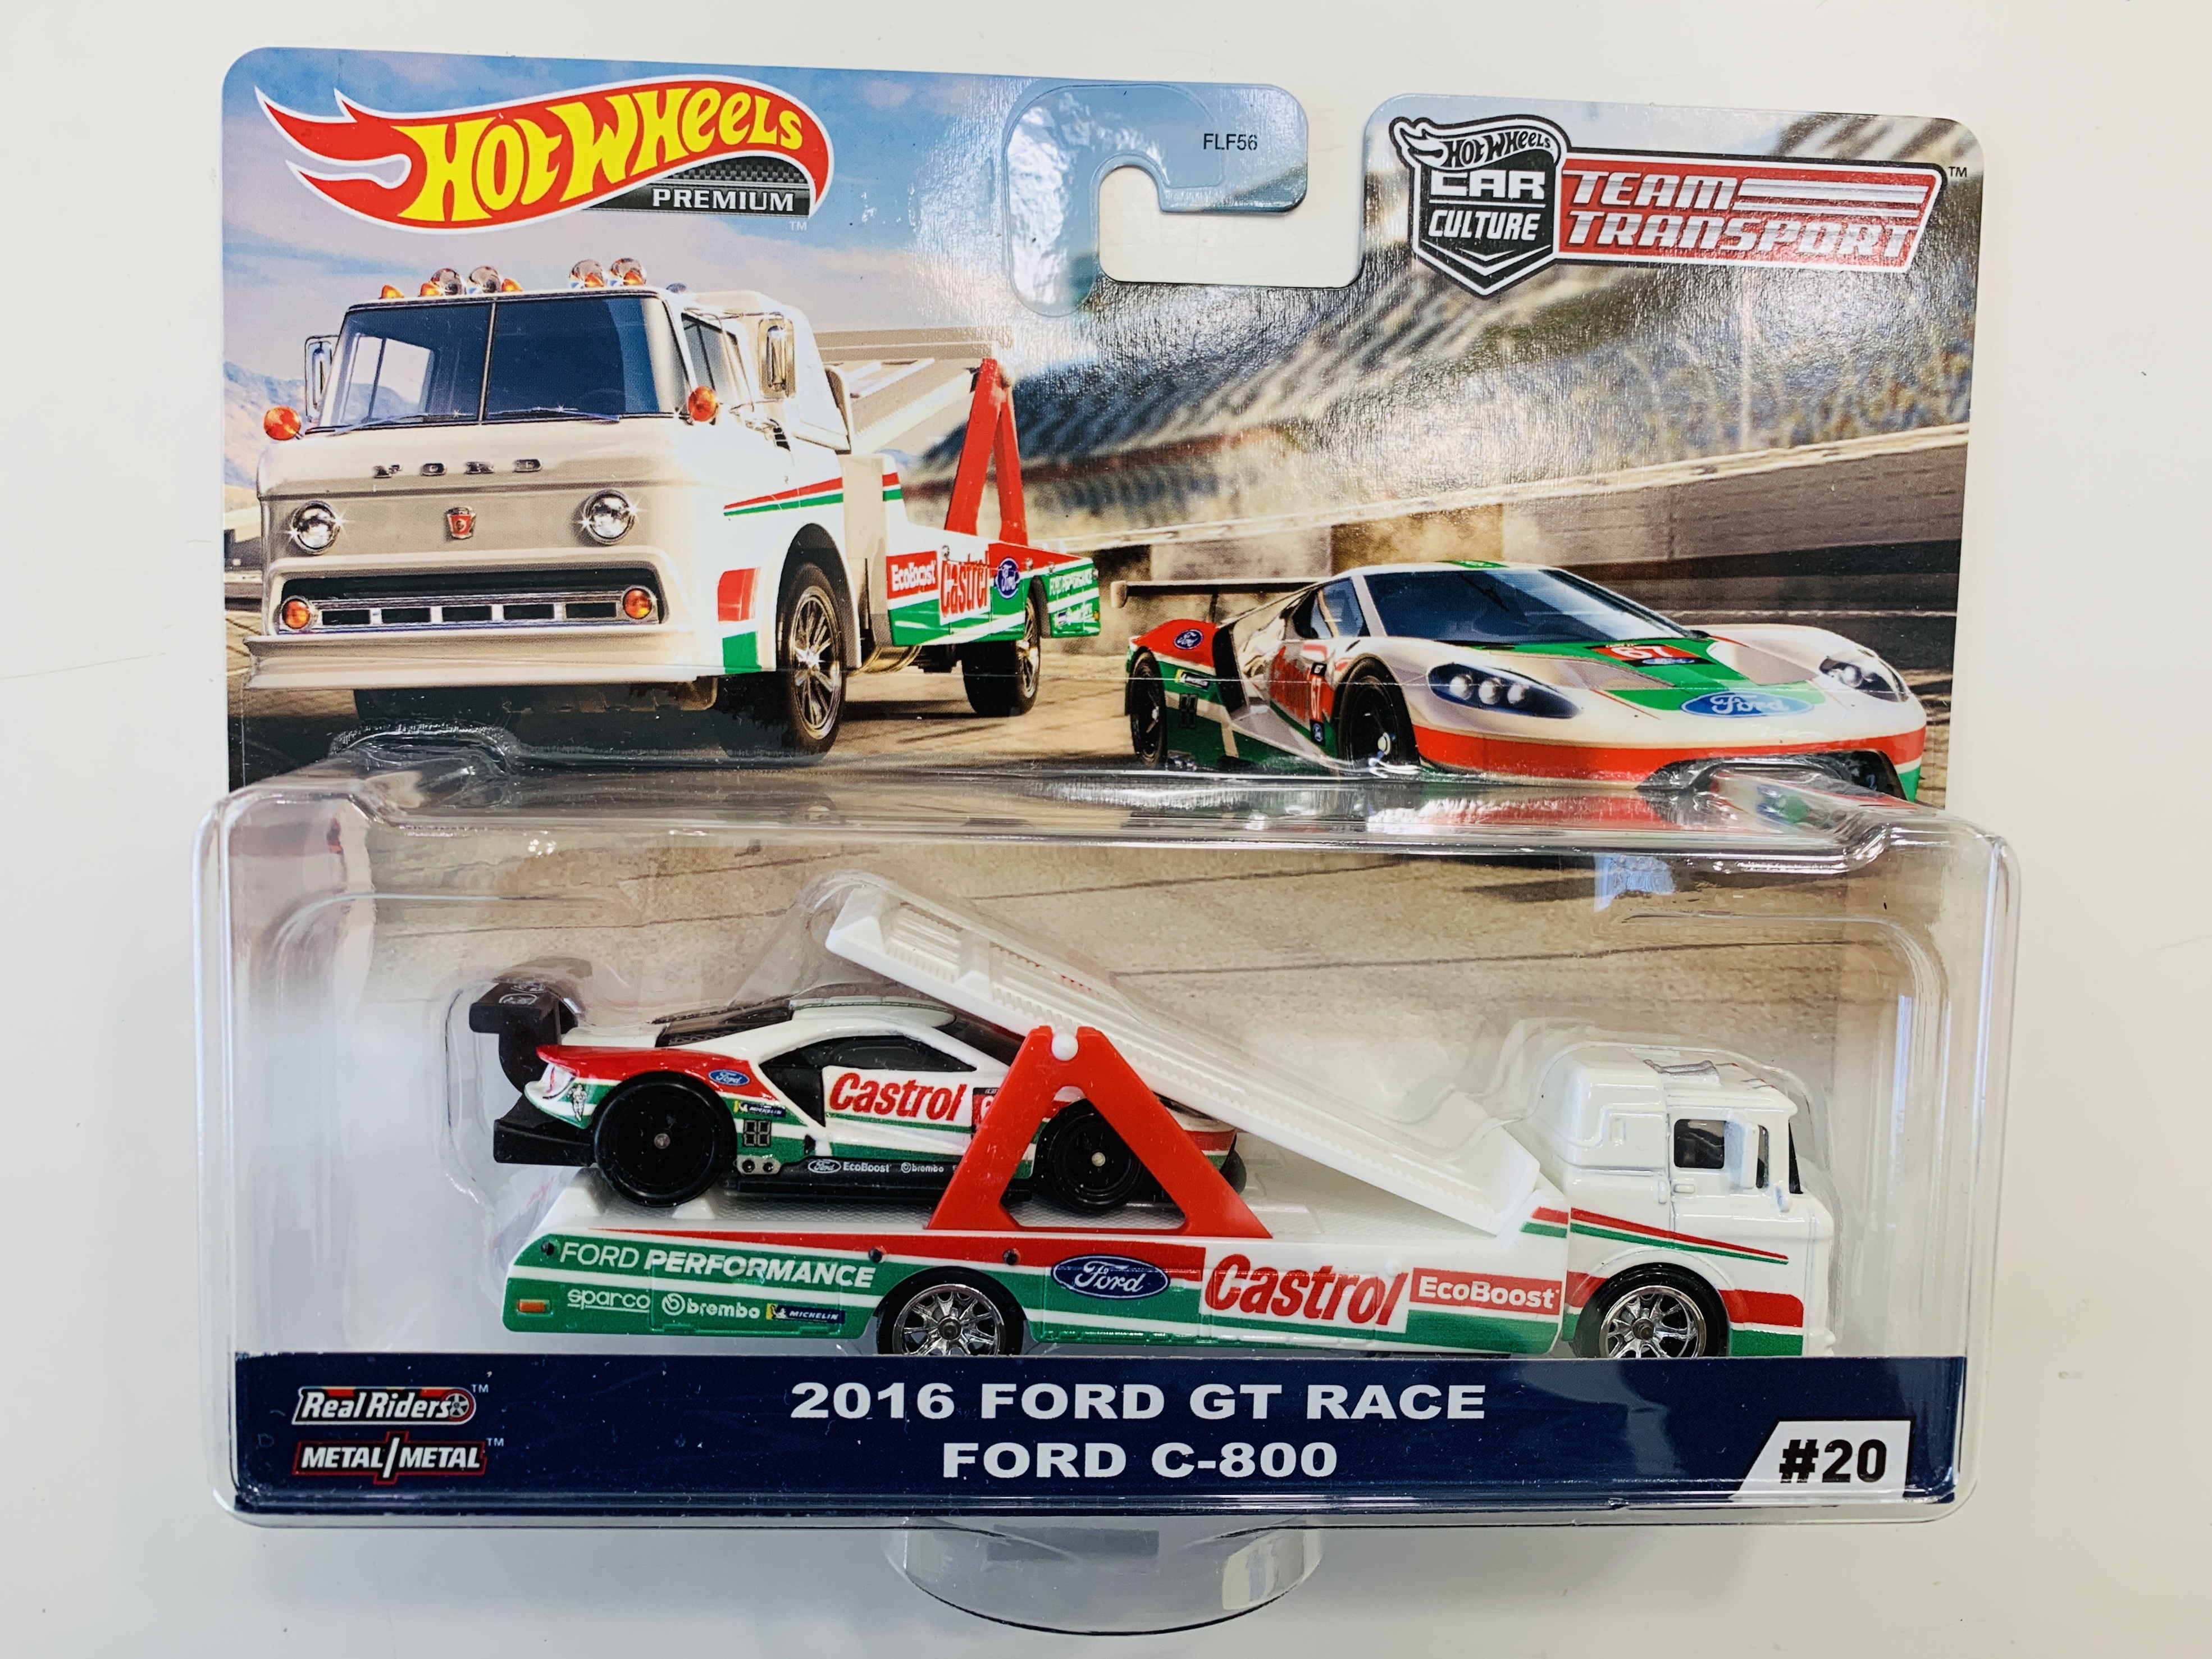 Hot Wheels Team Transport #20 2016 Ford GT Race / Ford C-800